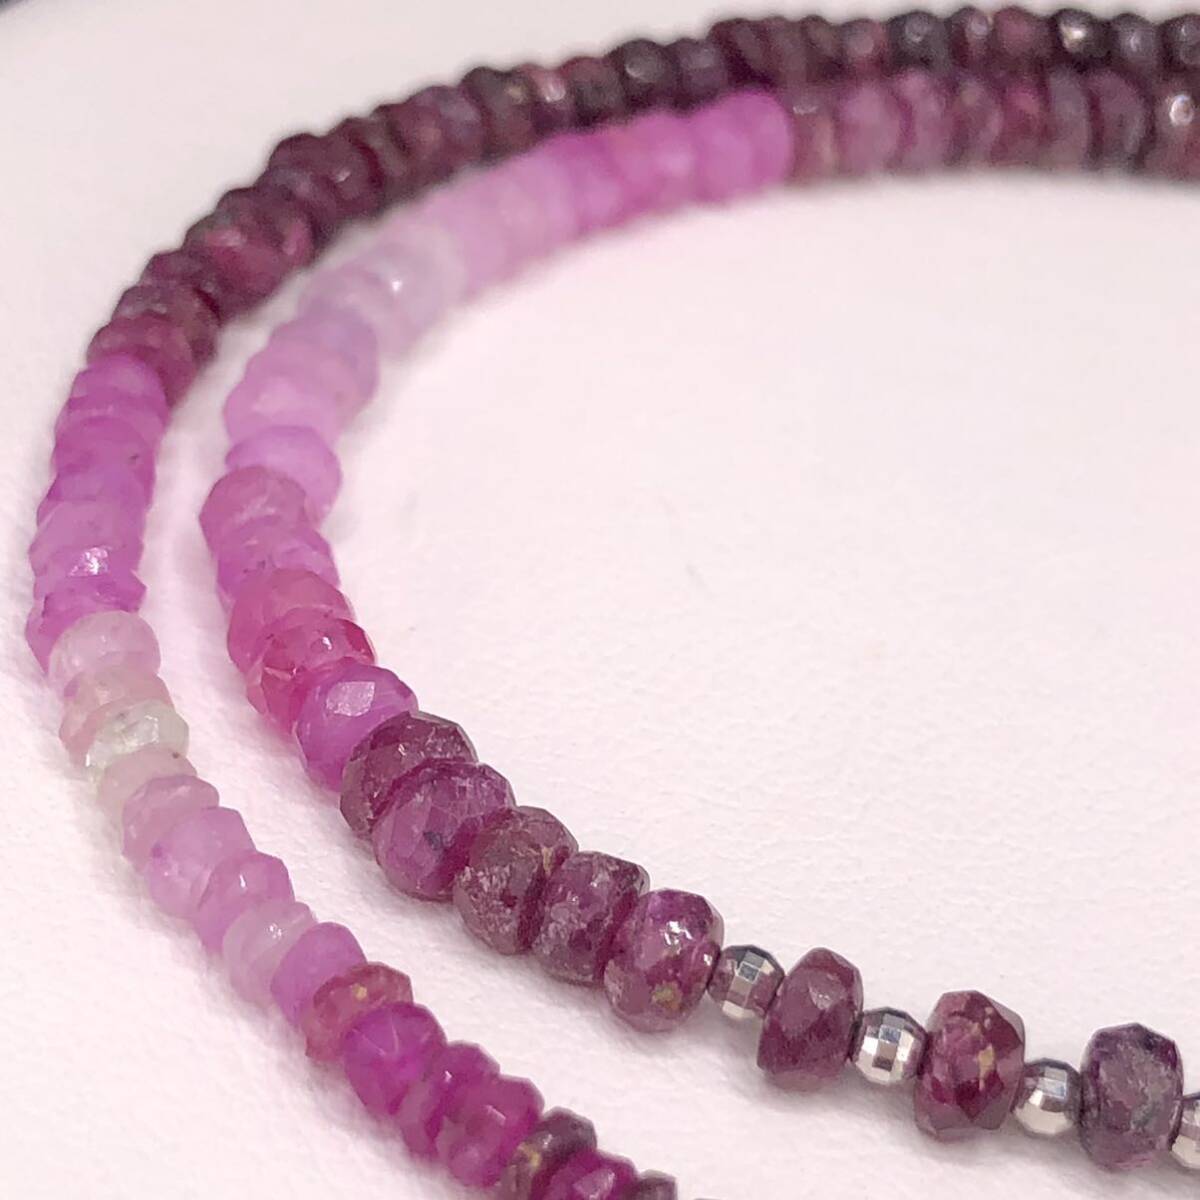 E04-4976 ルビーネックレス 10.3g ( ルビruby necklace K18WG accessory jewelry )の画像1